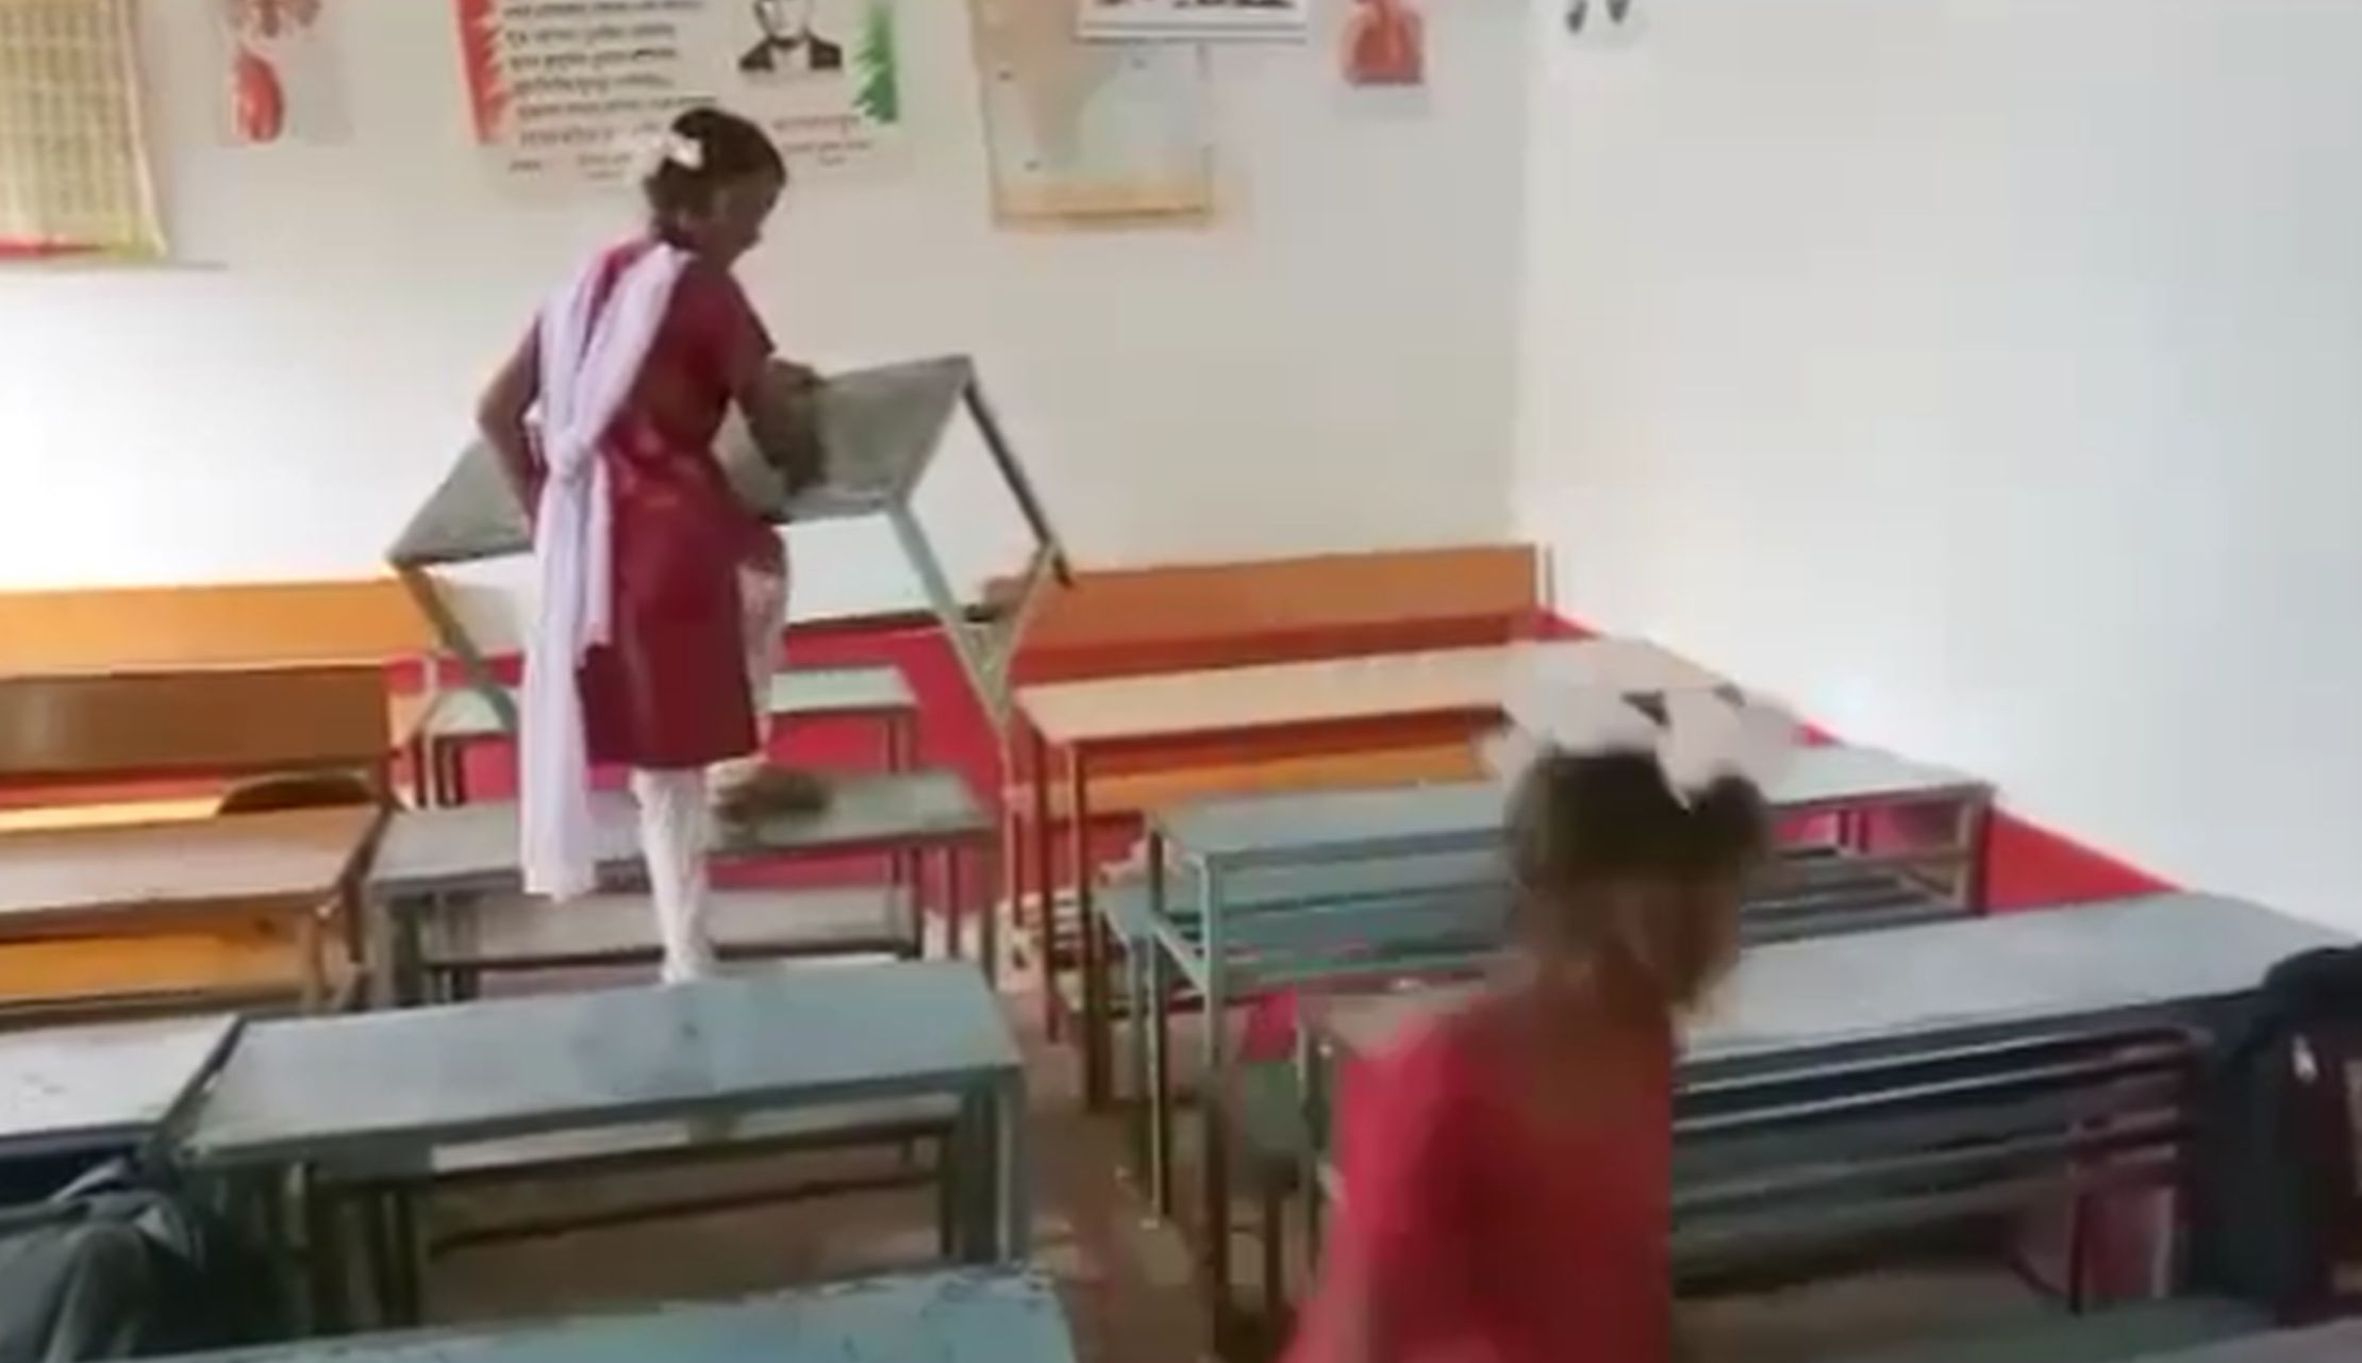 At the school's PUN AC office, the girl adopts the broom